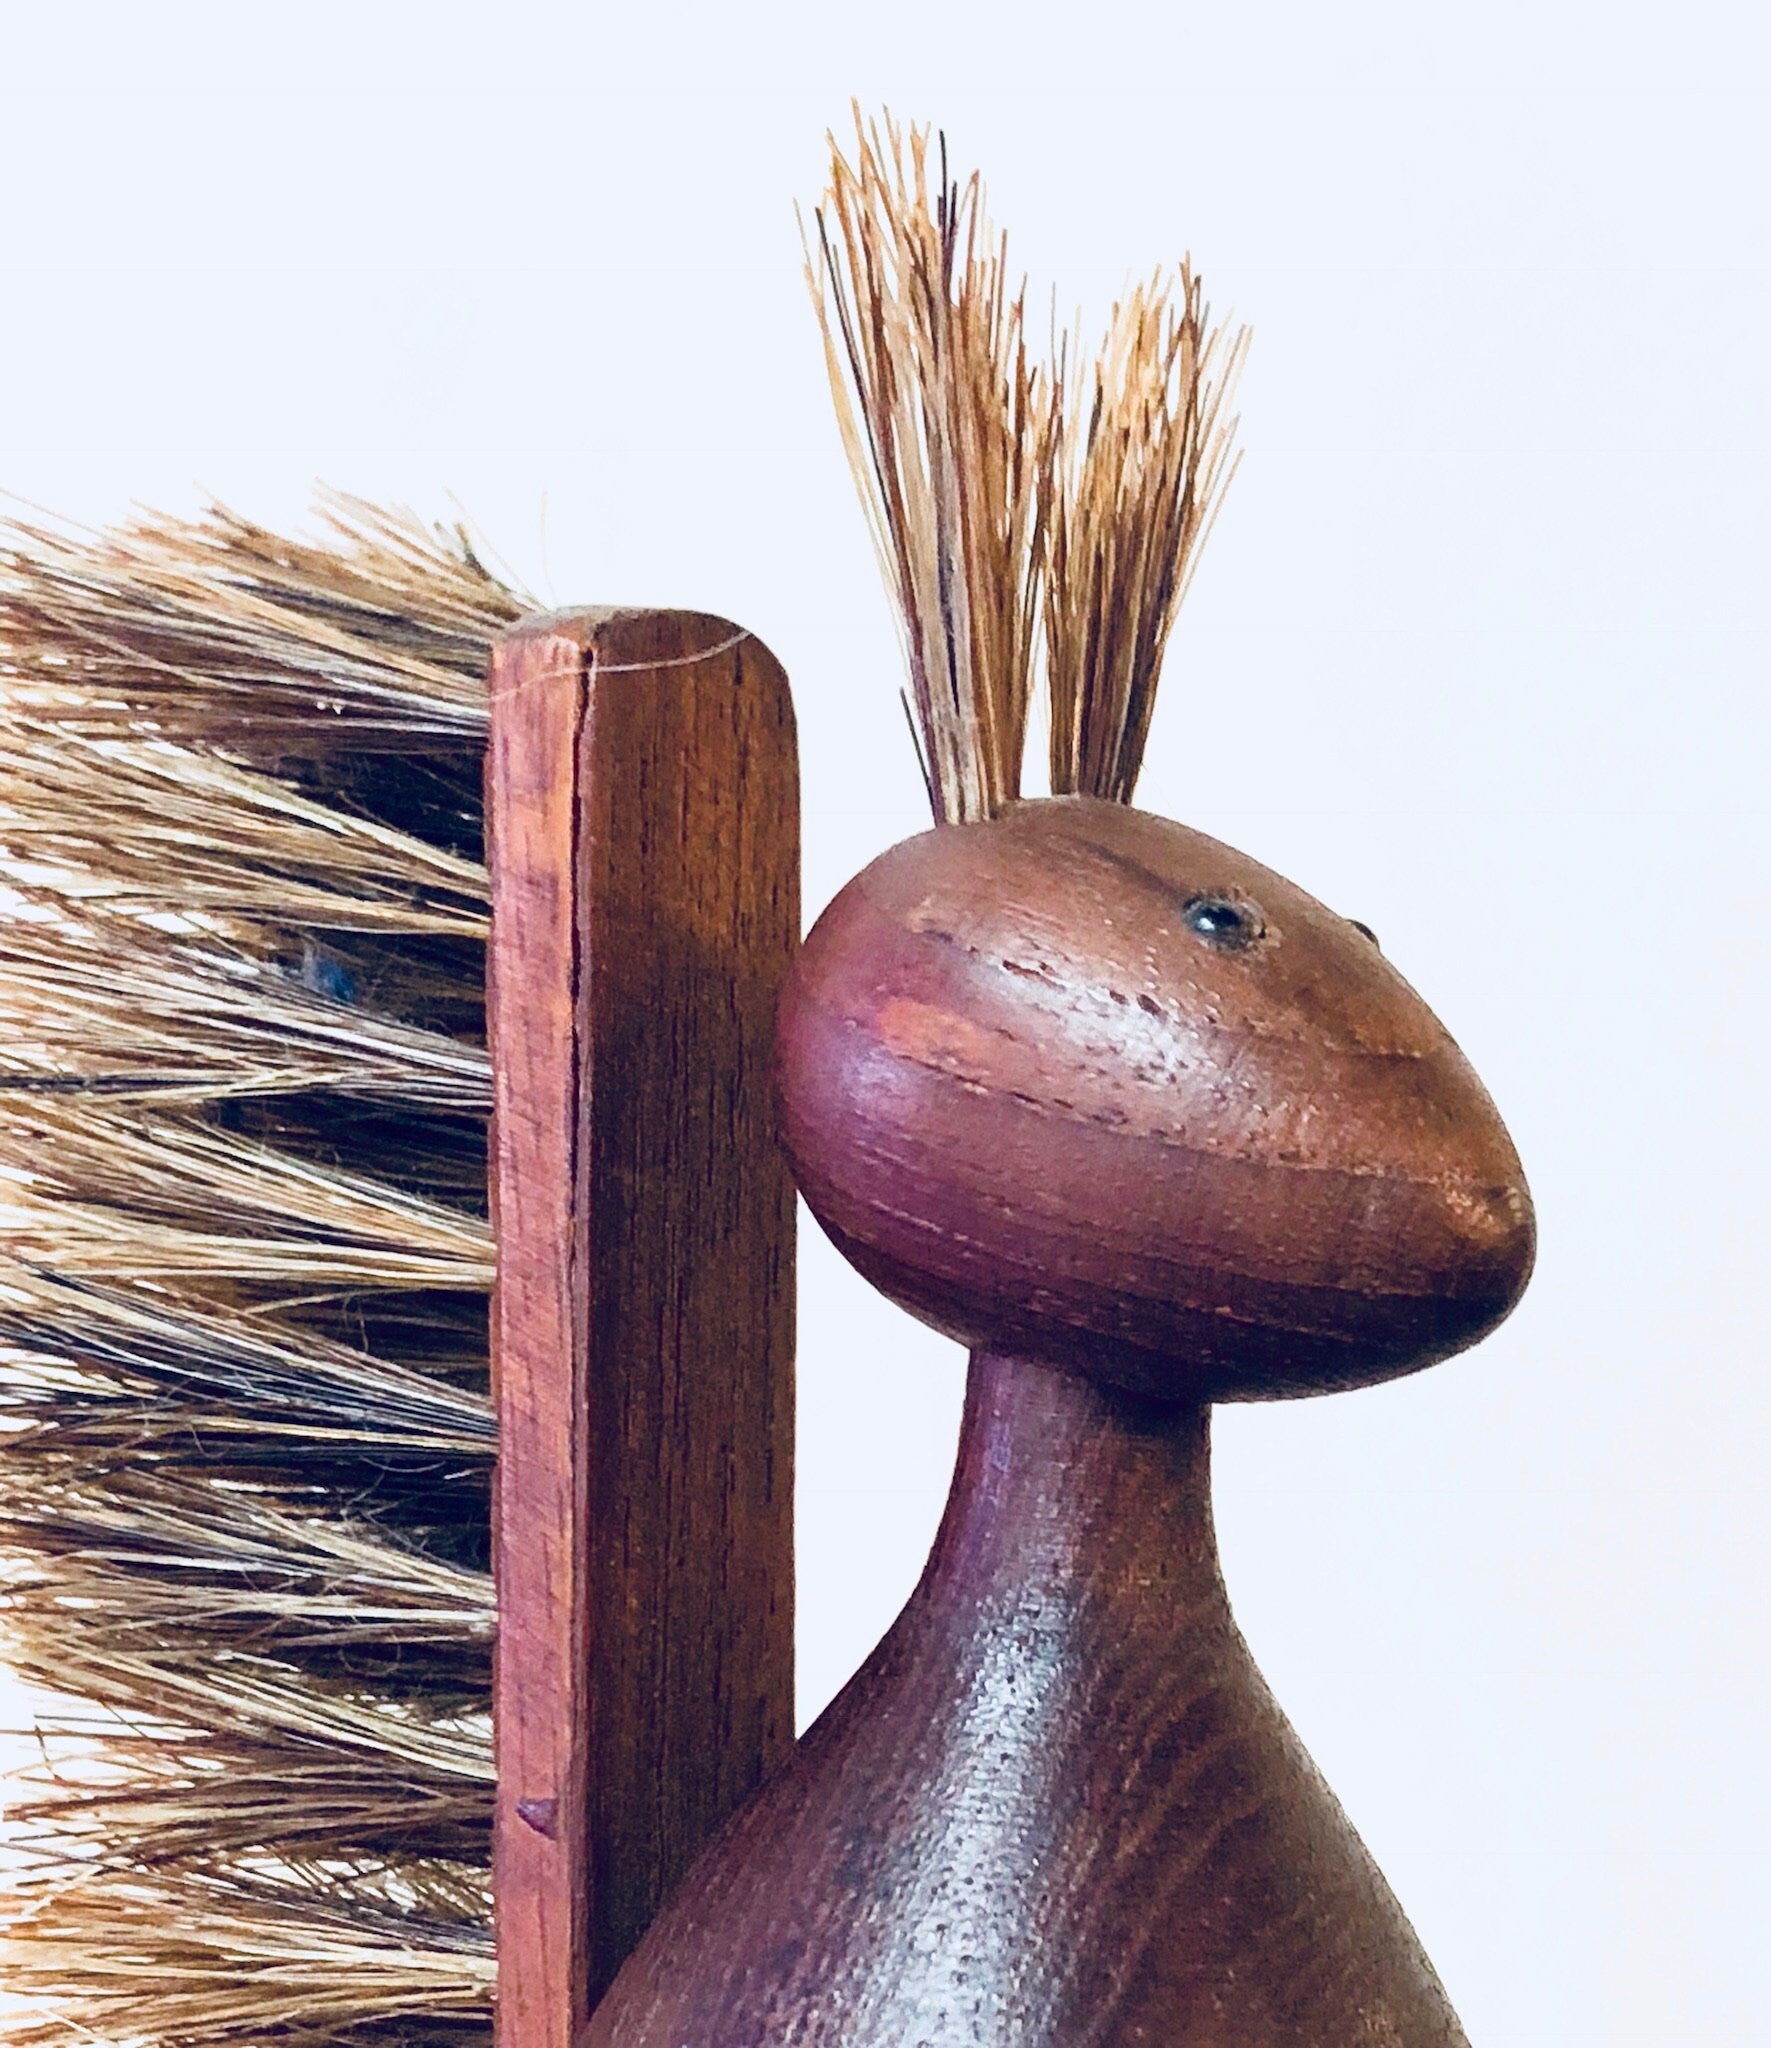 Wooden vintage scrub brush shaped like a squirrel with bristles, rustic brown decor